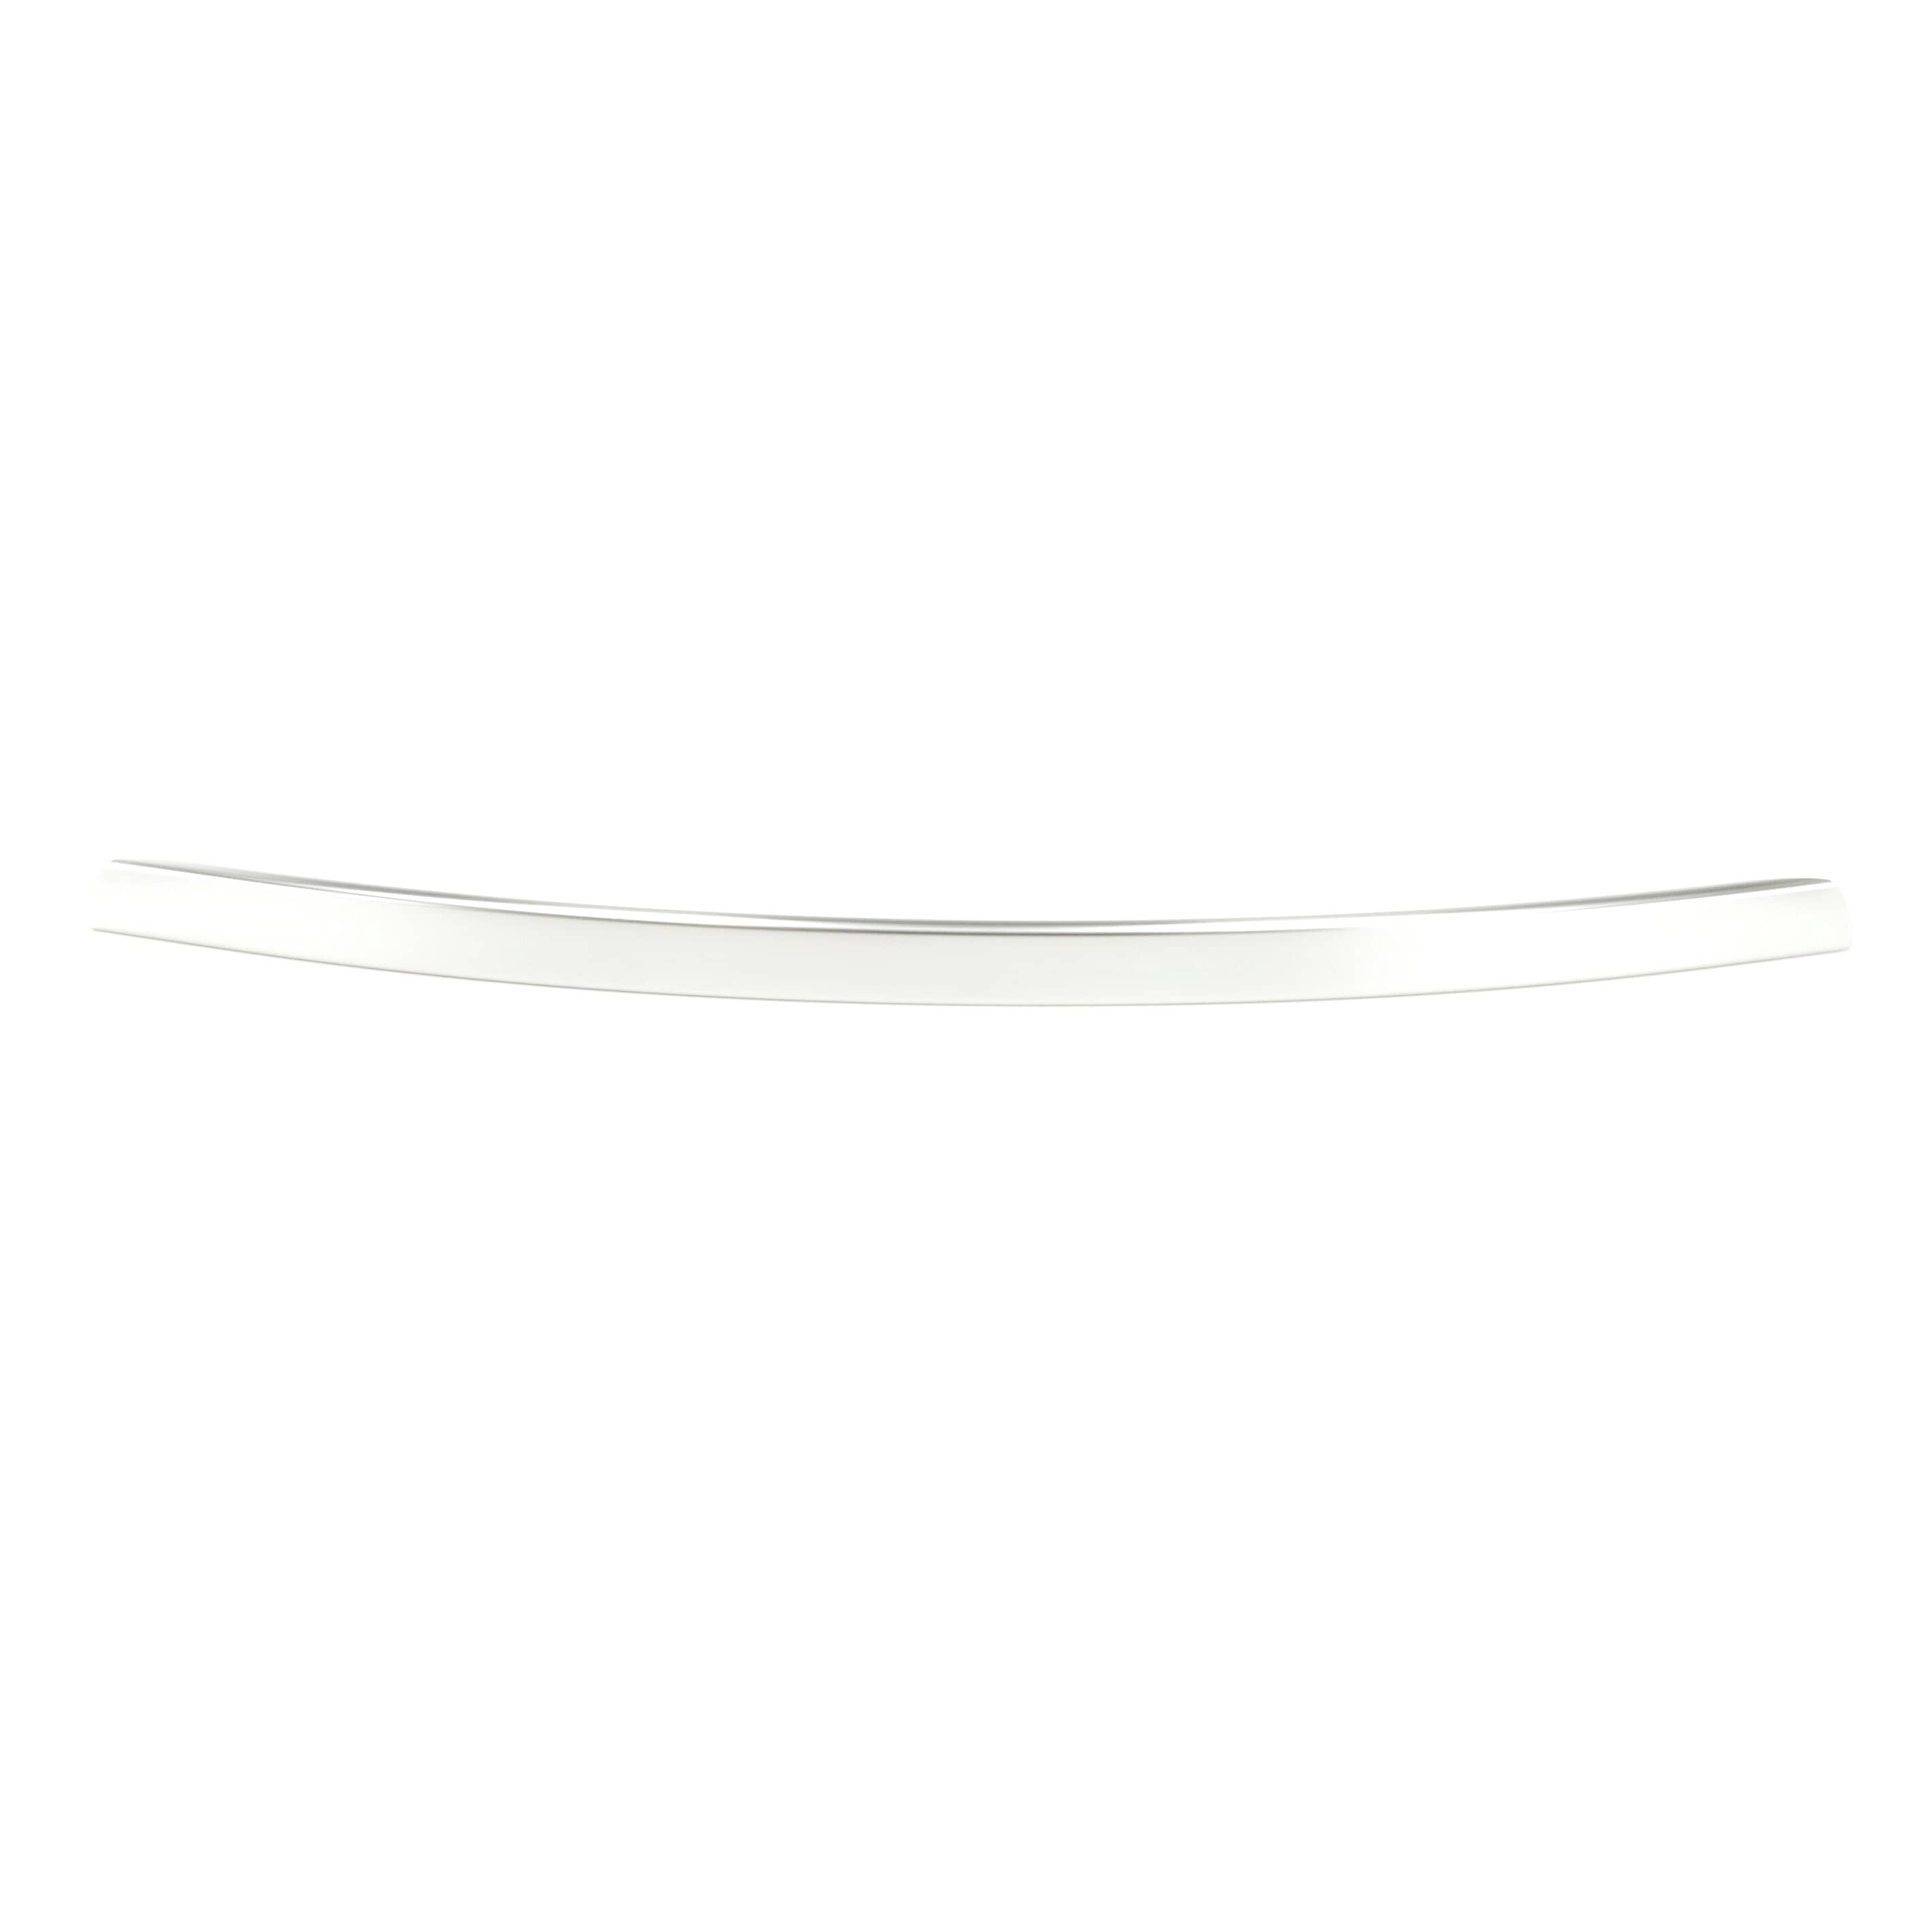 LG AED73593251 Refrigerator Handle Assembly